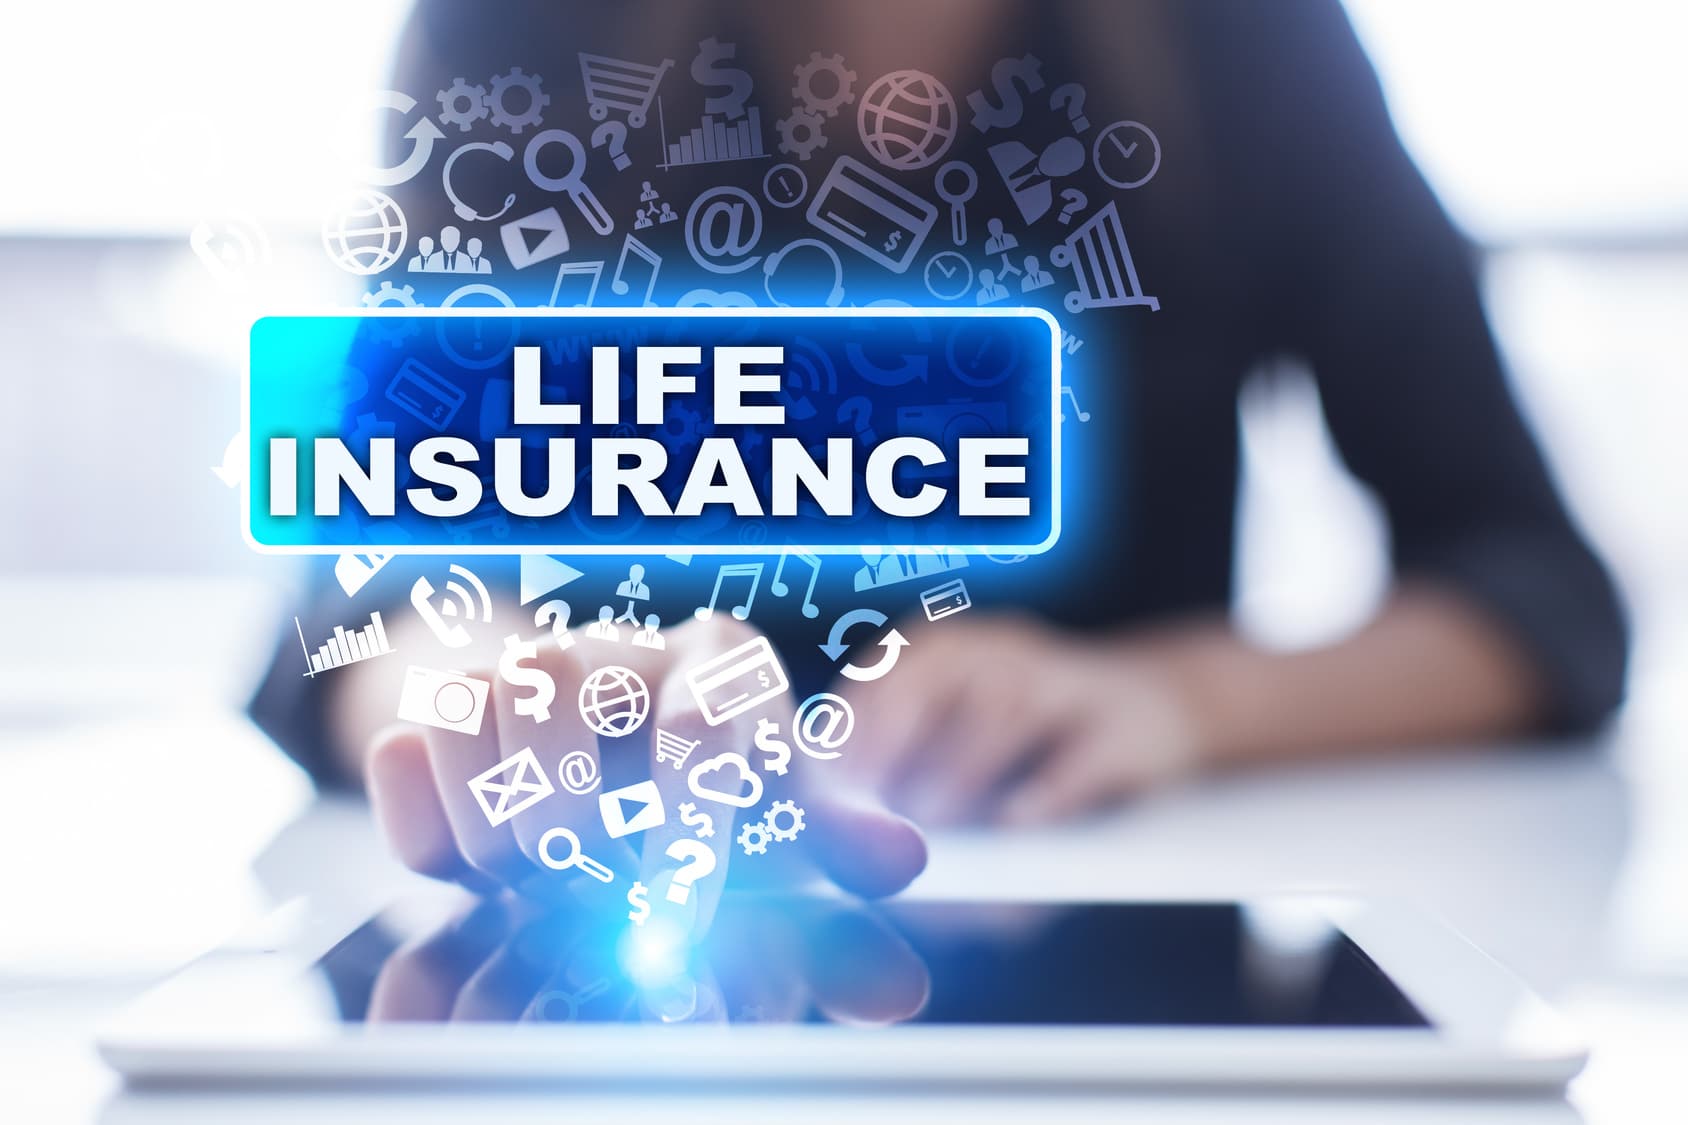 How to Shop for Life Insurance with Pre-Existing Conditions